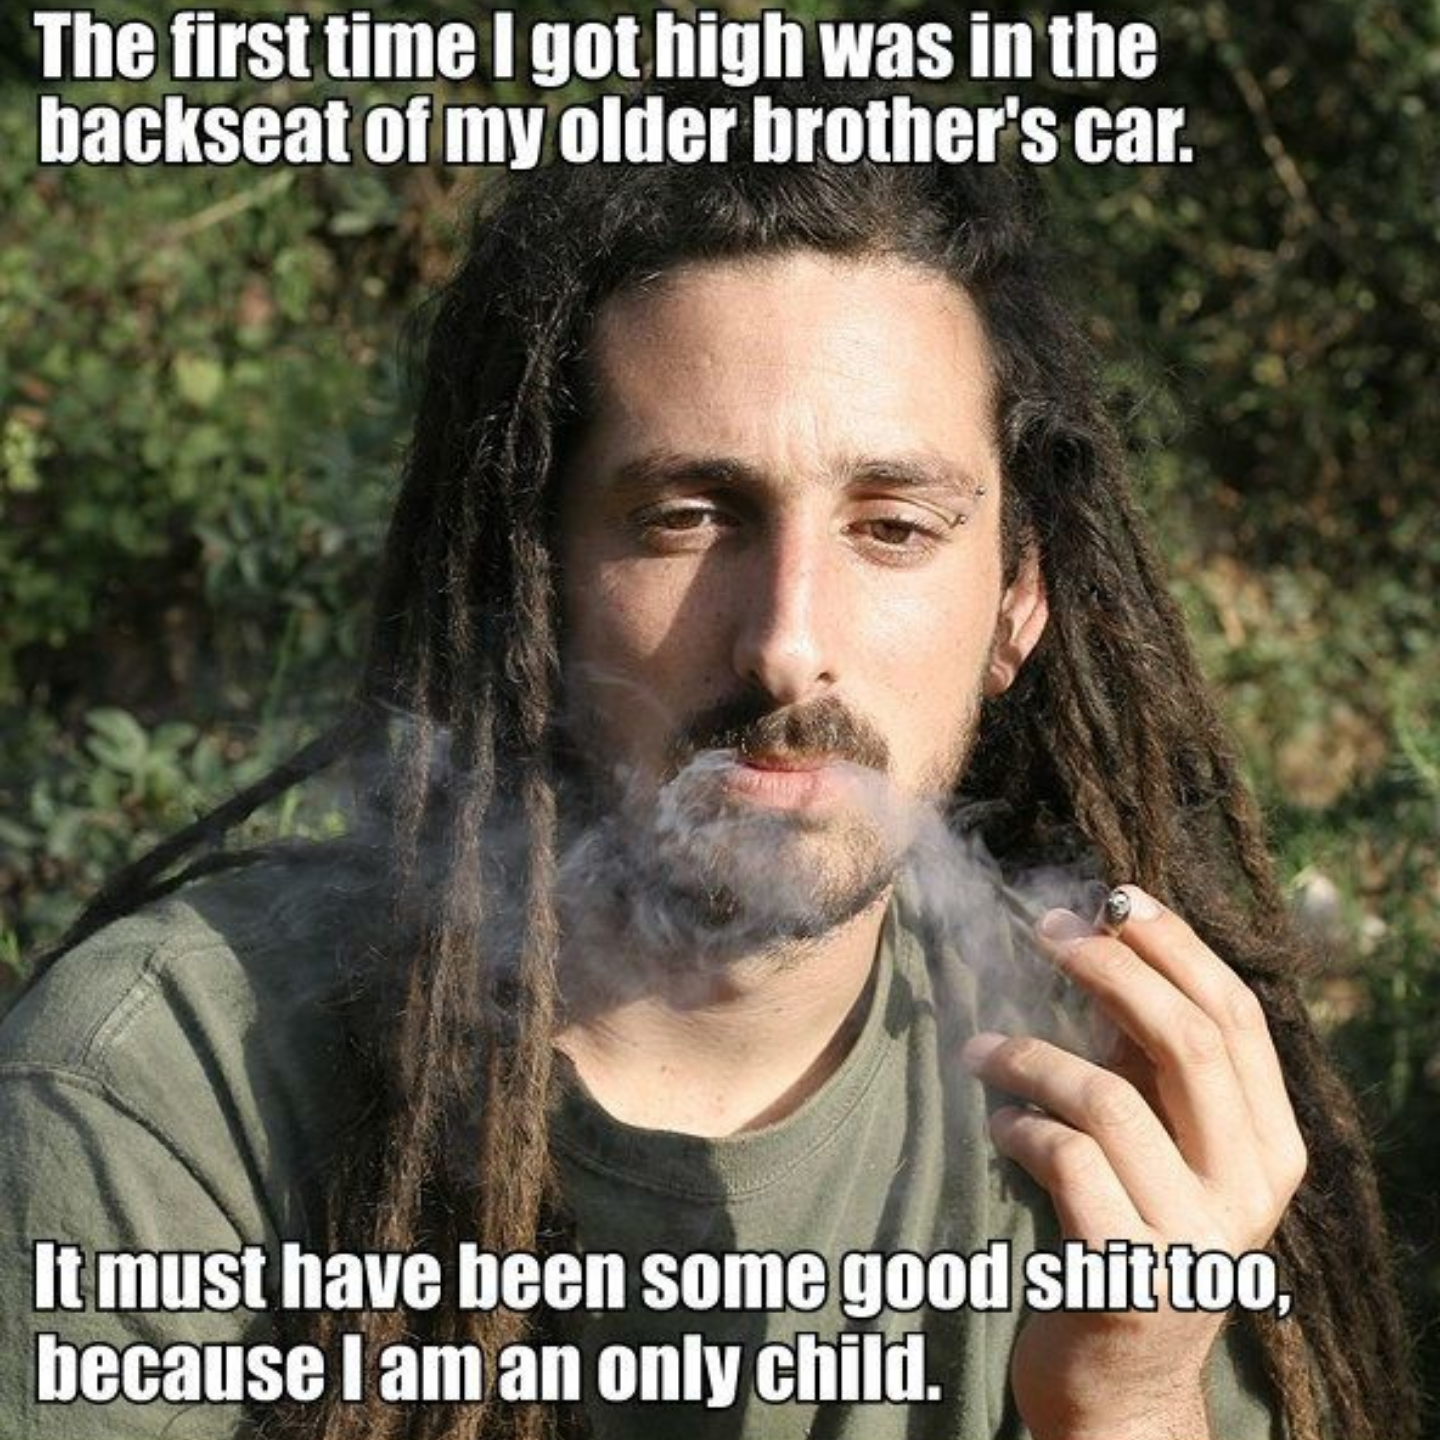 funny stoner memes - The first time I got high was in the backseat of my older brother's car. It must have been some good shittoo, because I am an only child.